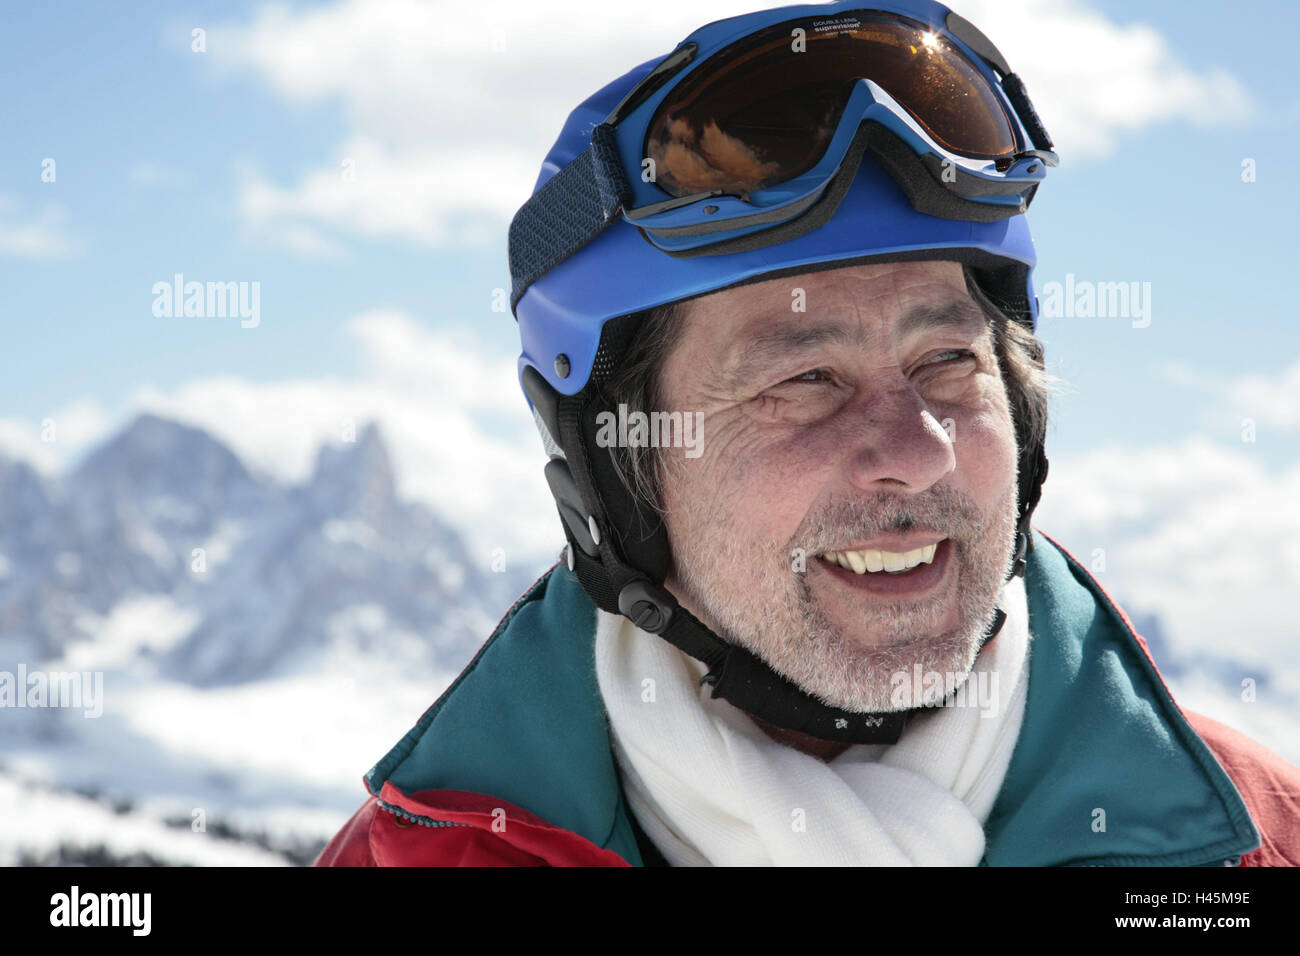 Italy, the Dolomites, Fassatal, senior, ski helmet, smile, portrait, curled, background, mountains, mountain world, snow-covered, veil clouds, man, person, stand, view, side view, ski glasses, beard, anorak, ski jacket, scarf, vacation, leisure time, recreation, joy, perseverance, sport, winter sports, skiing, mountain air, helmet, accident prevention, protection, Stock Photo